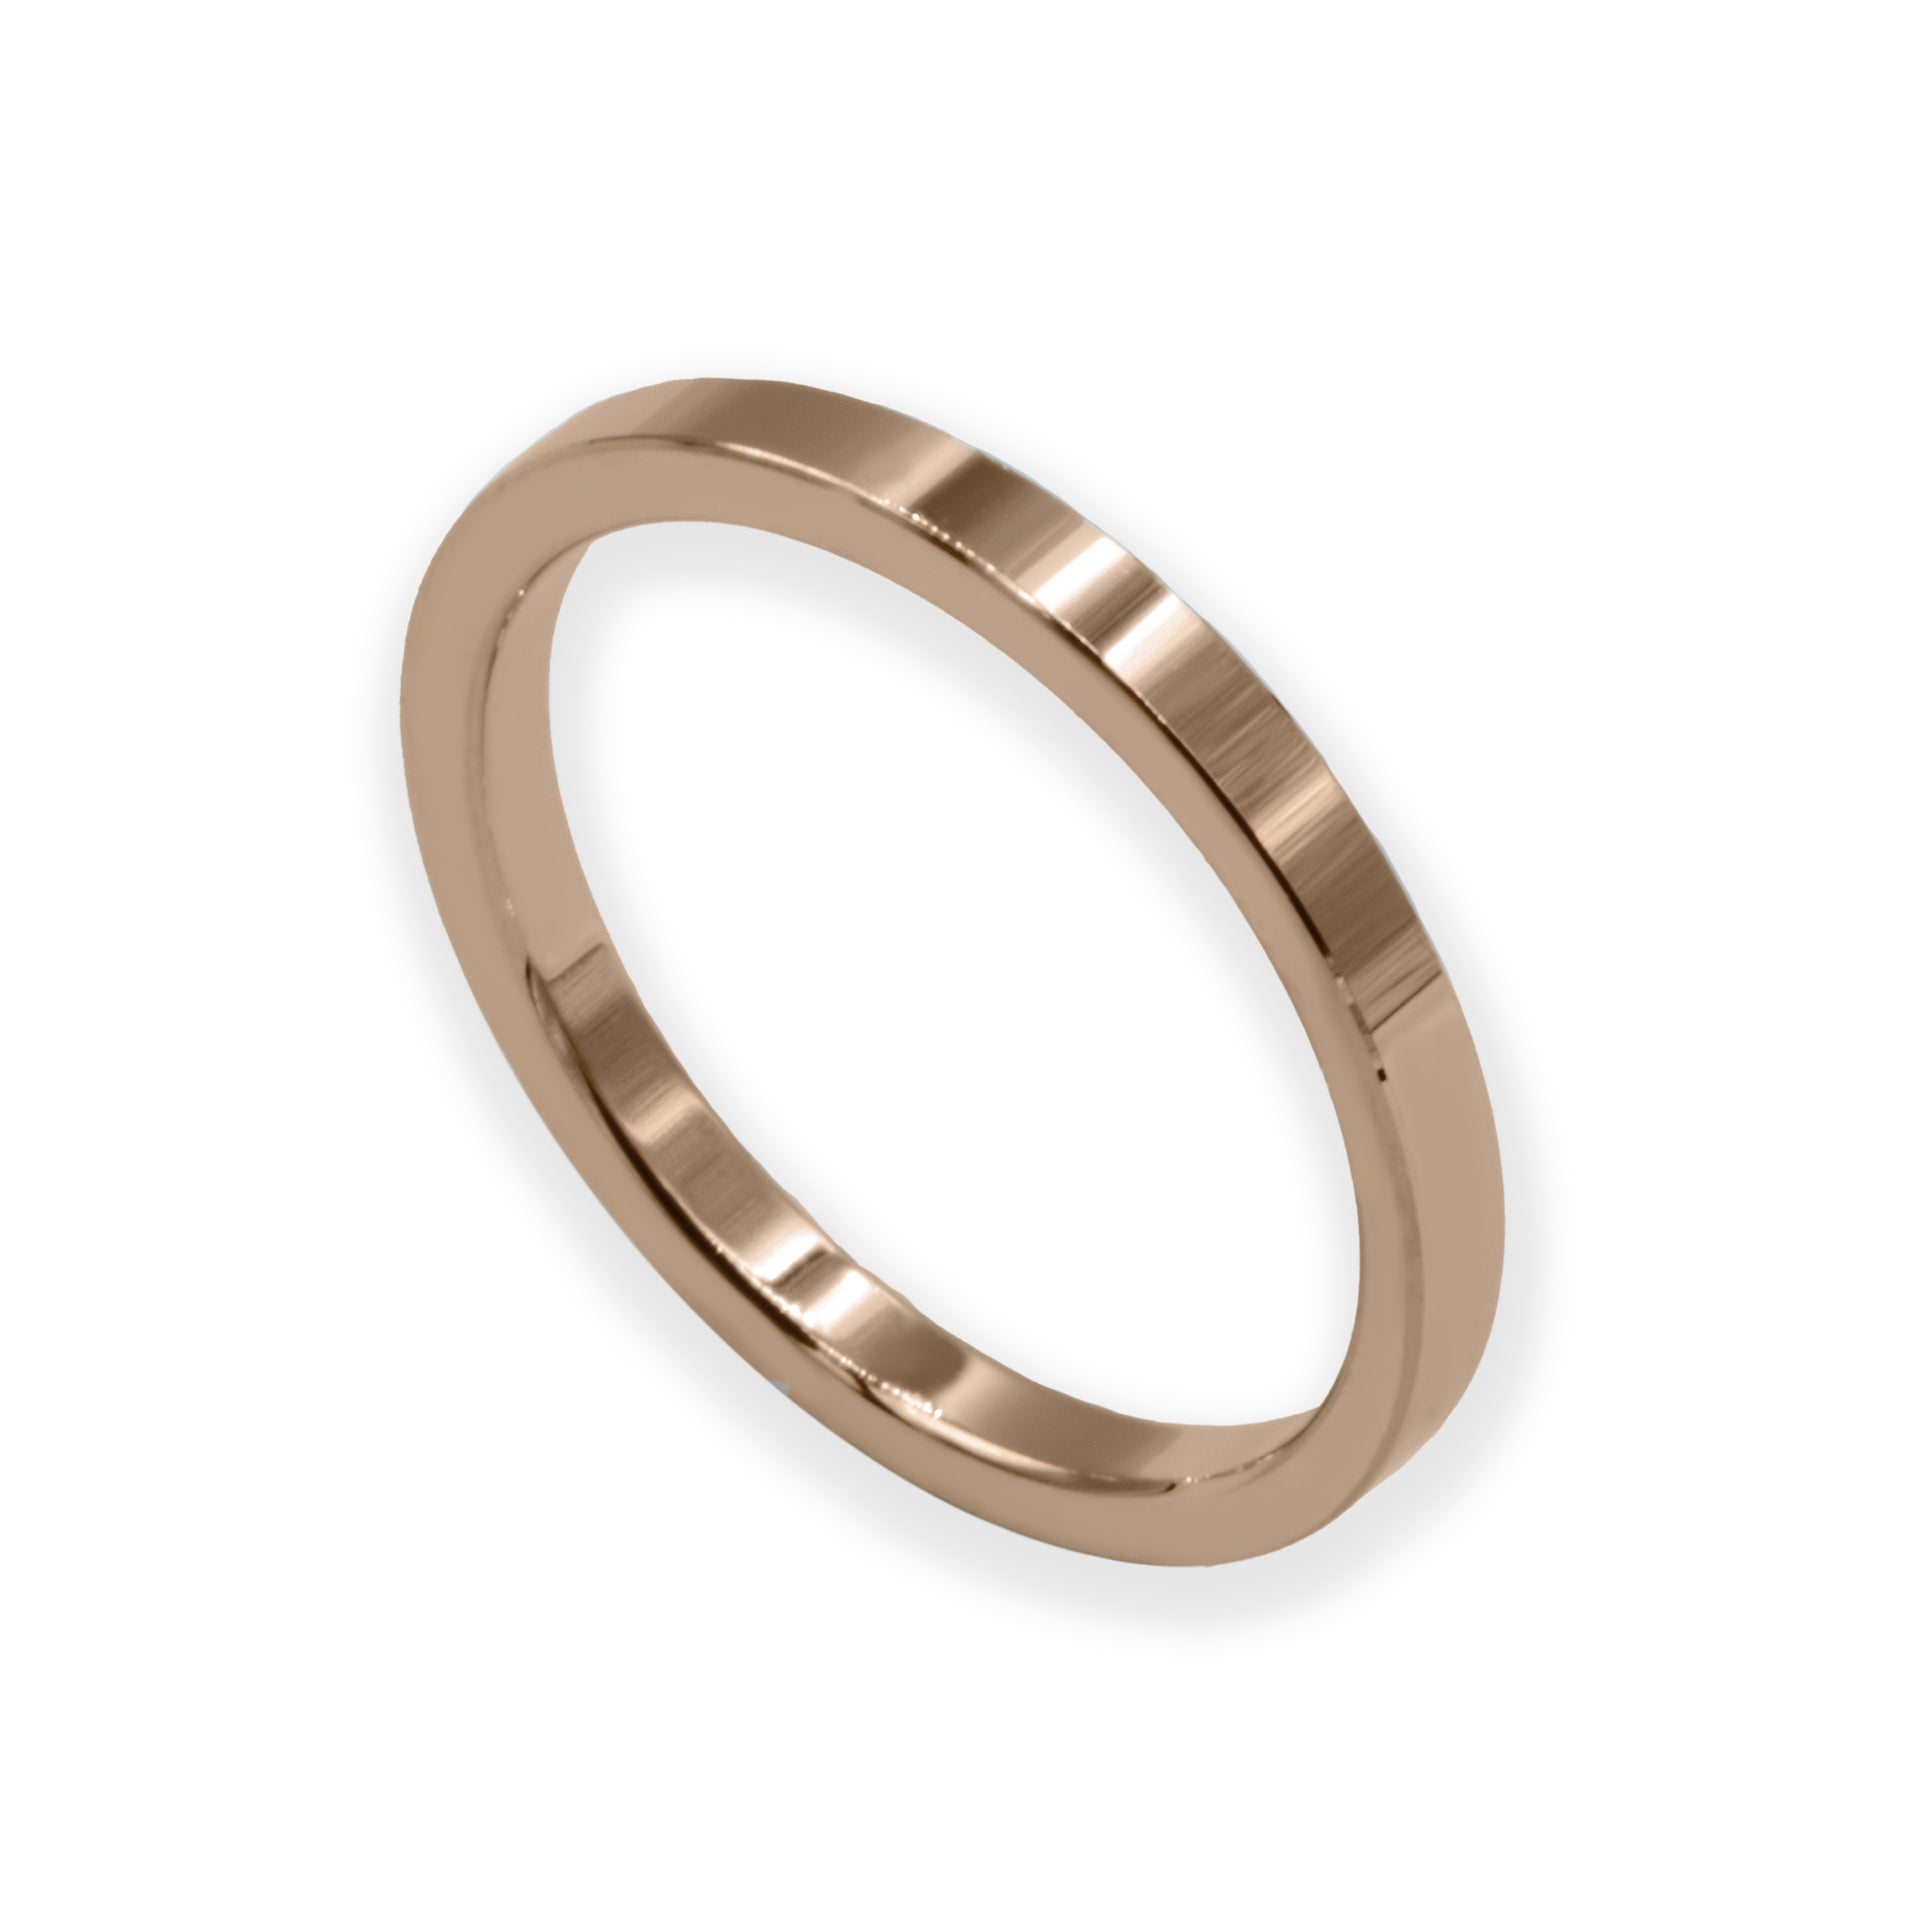 Bague EARTH IS ROUND 2mm profil plat or rouge 18k